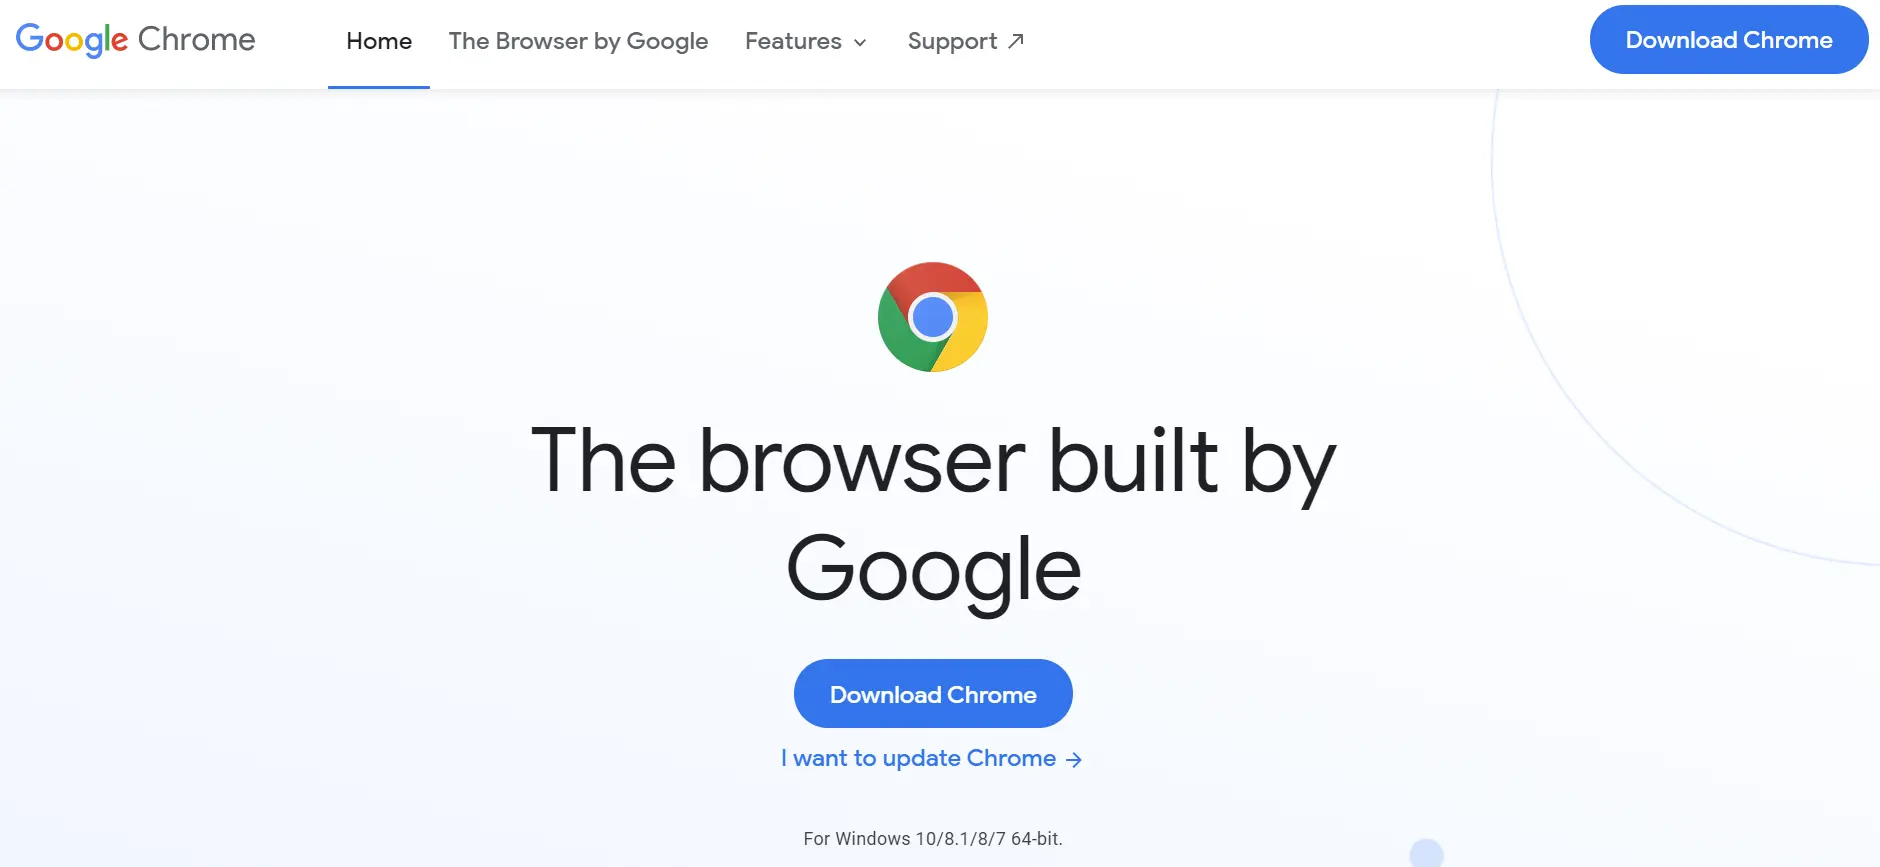 Getting started with the Chrome browser